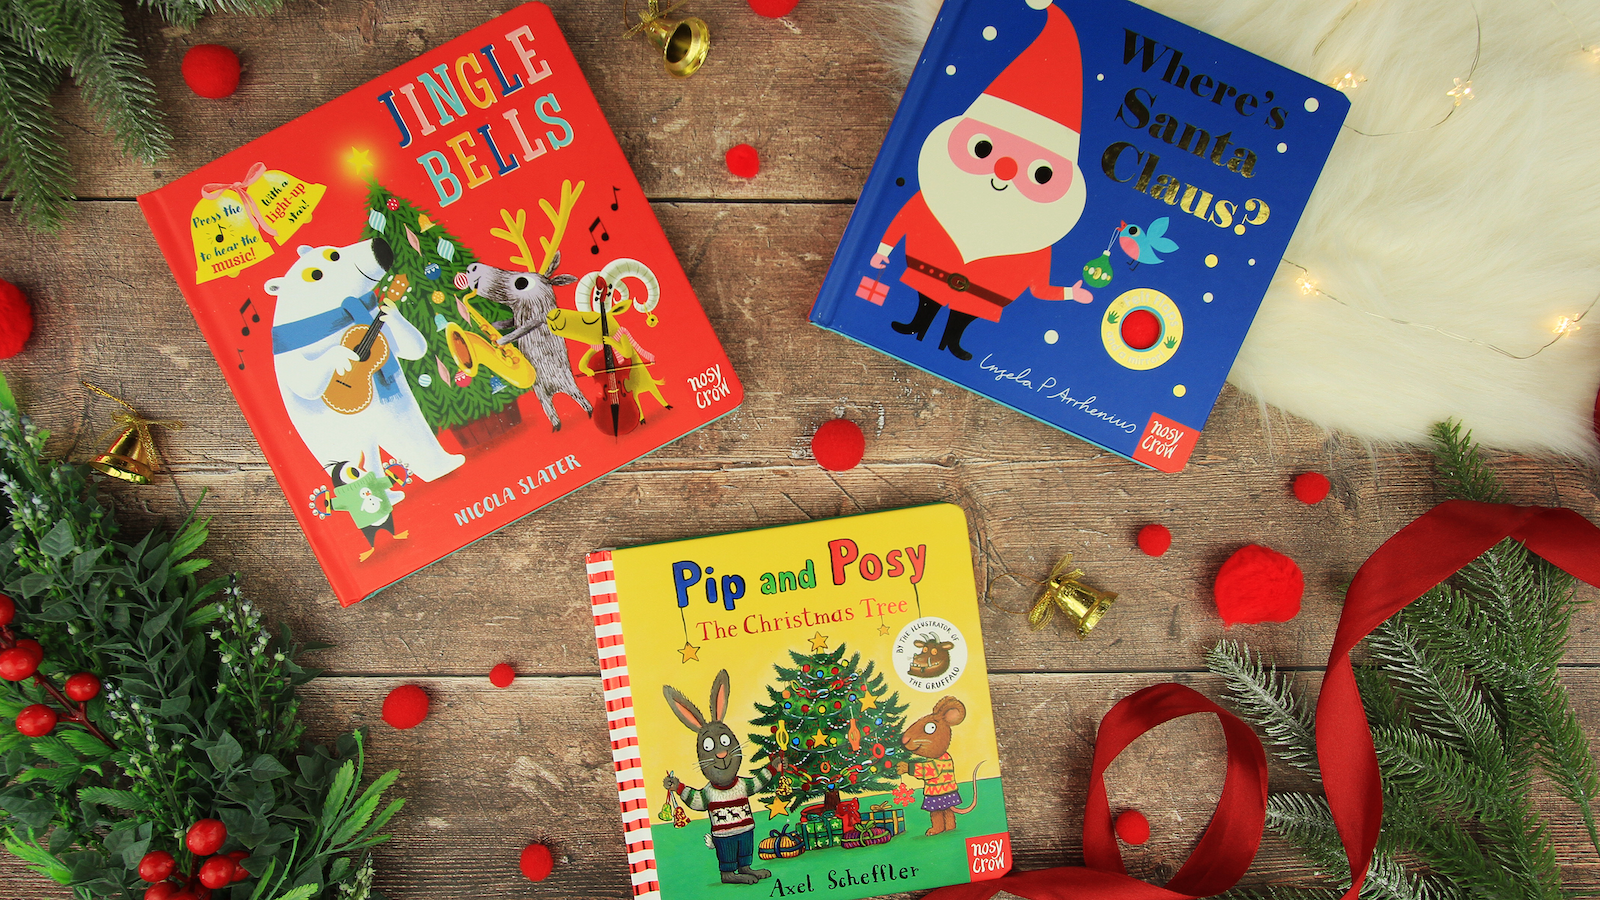 Christmas gift ideas for babies and toddlers - Where's Santa Claus by Ingela P Arrhenius, Jingle Bells by Nicola Slater, Pip and Posy: The Christmas Tree by Axel Scheffler